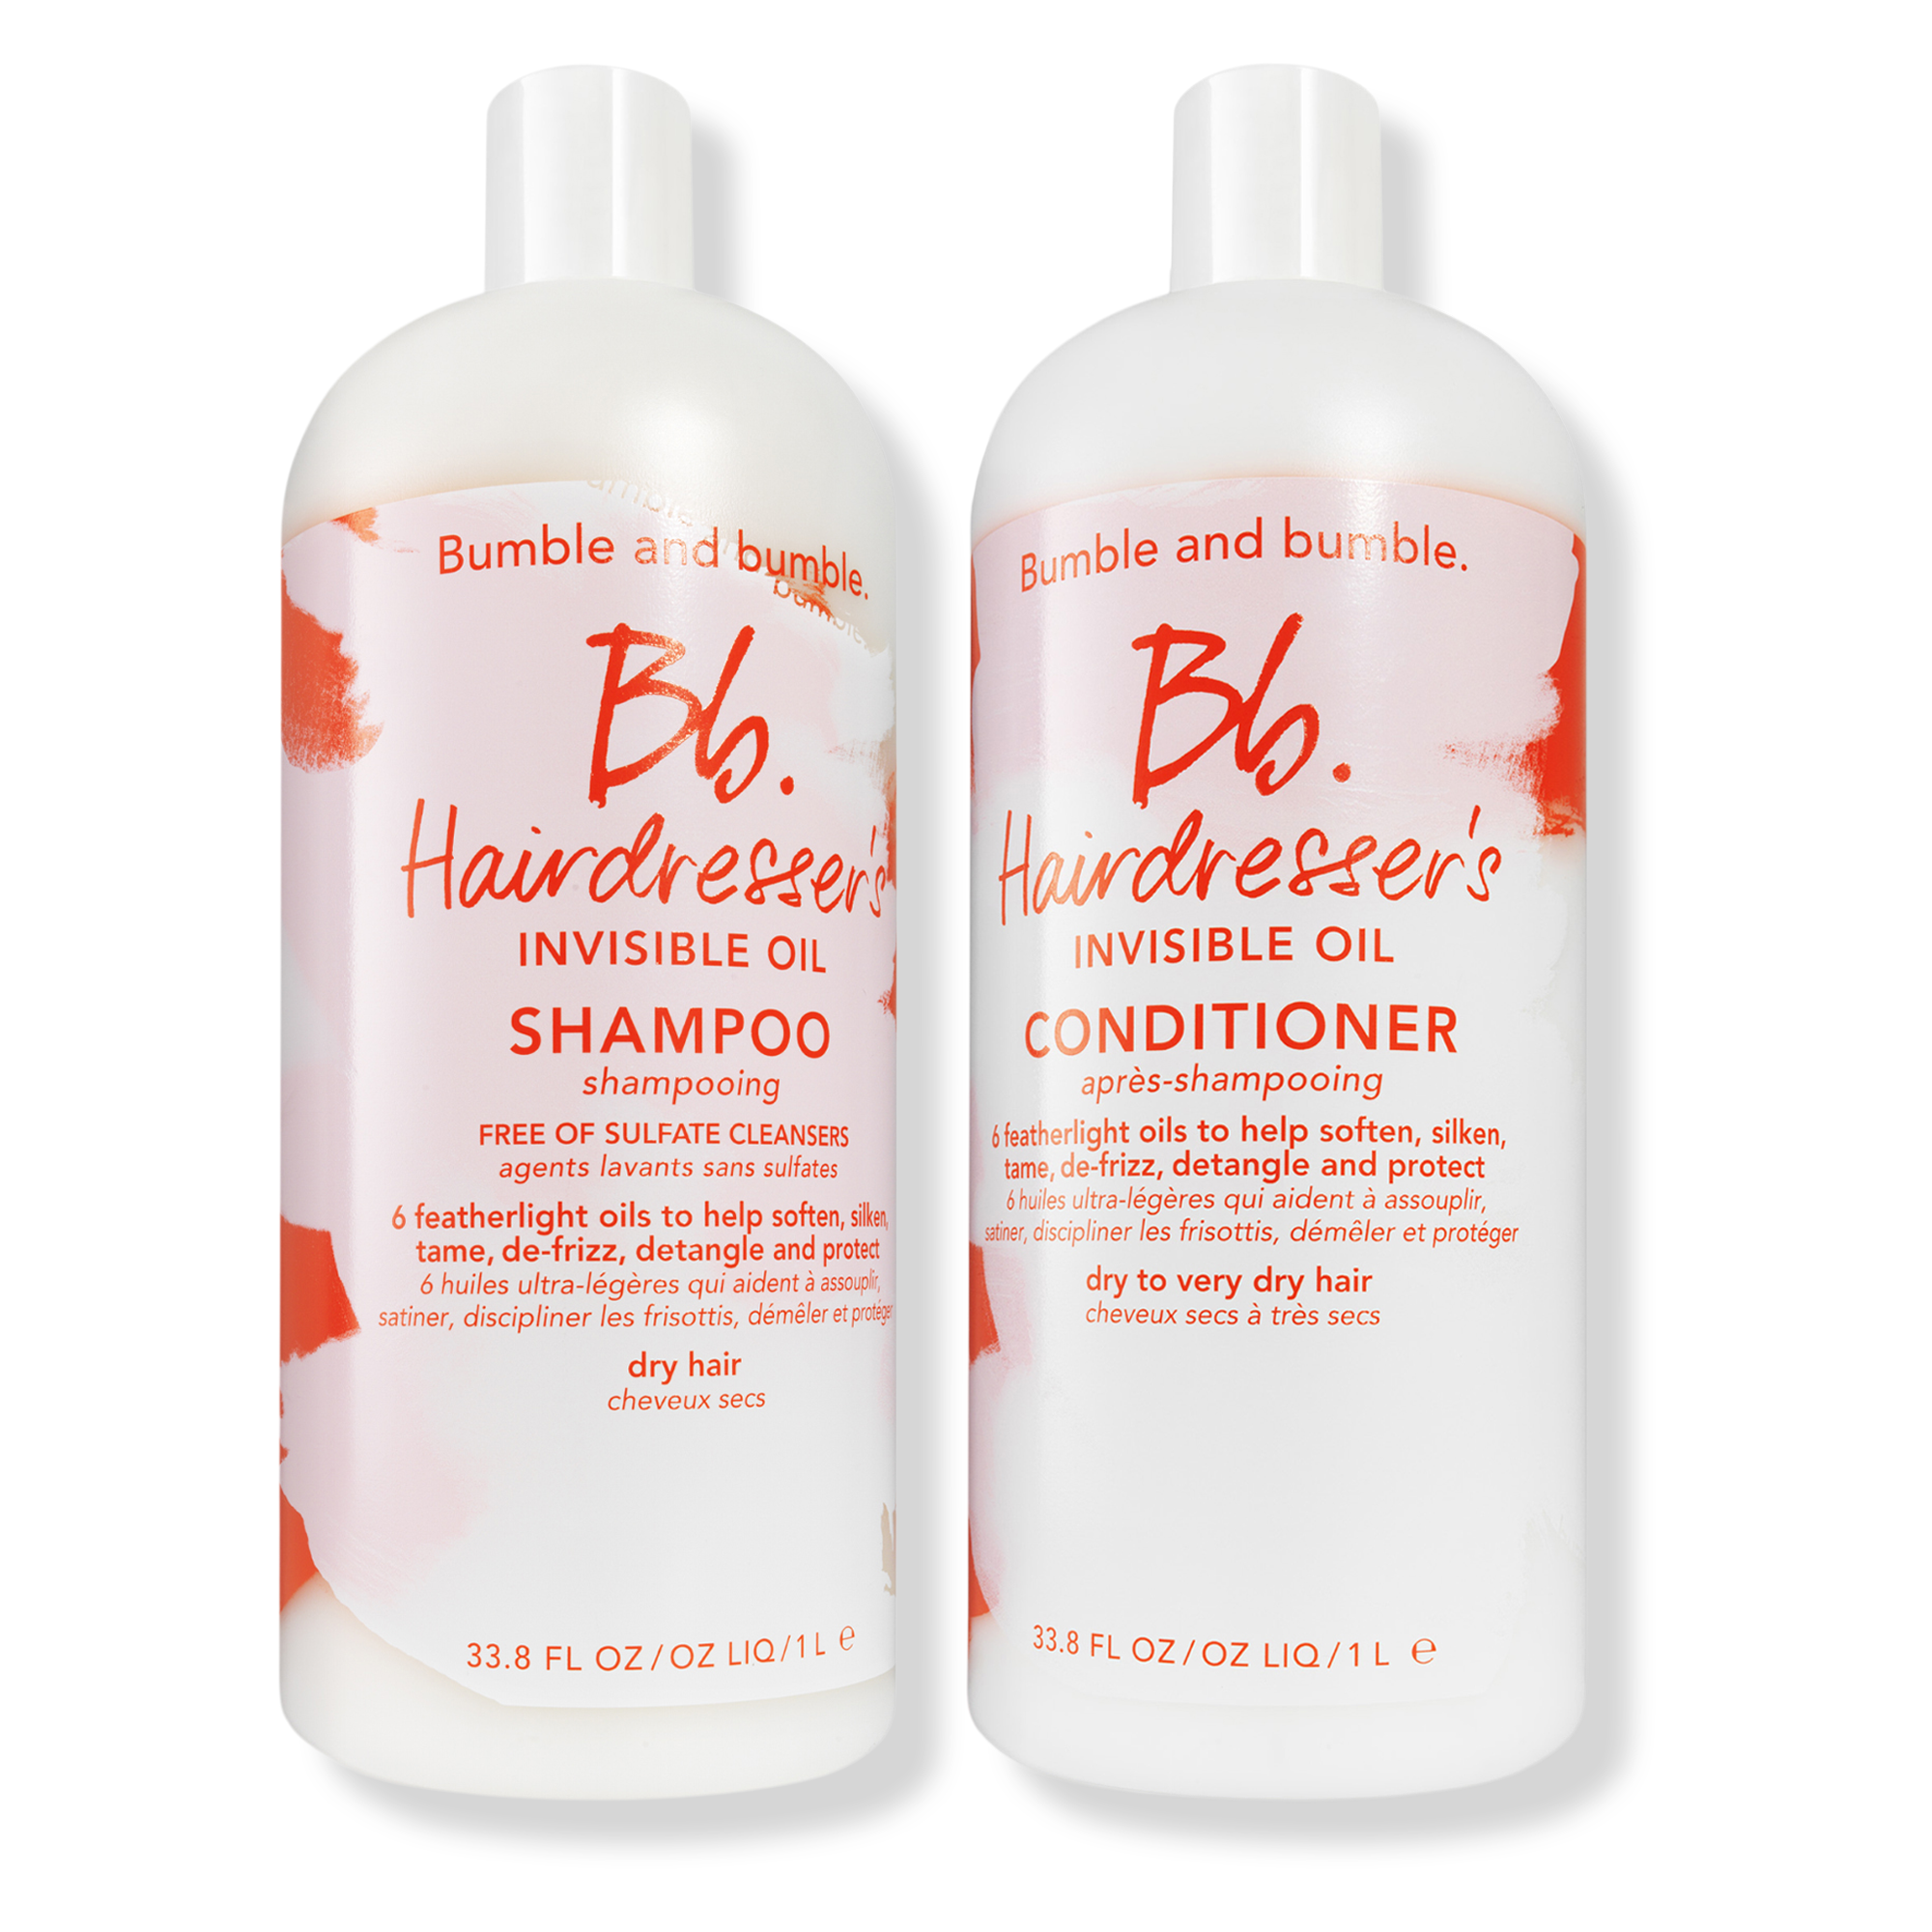 Bumble and bumble Hairdresser's Oil Shampoo and Conditioner Liter Duo ($216 Value) / LITER